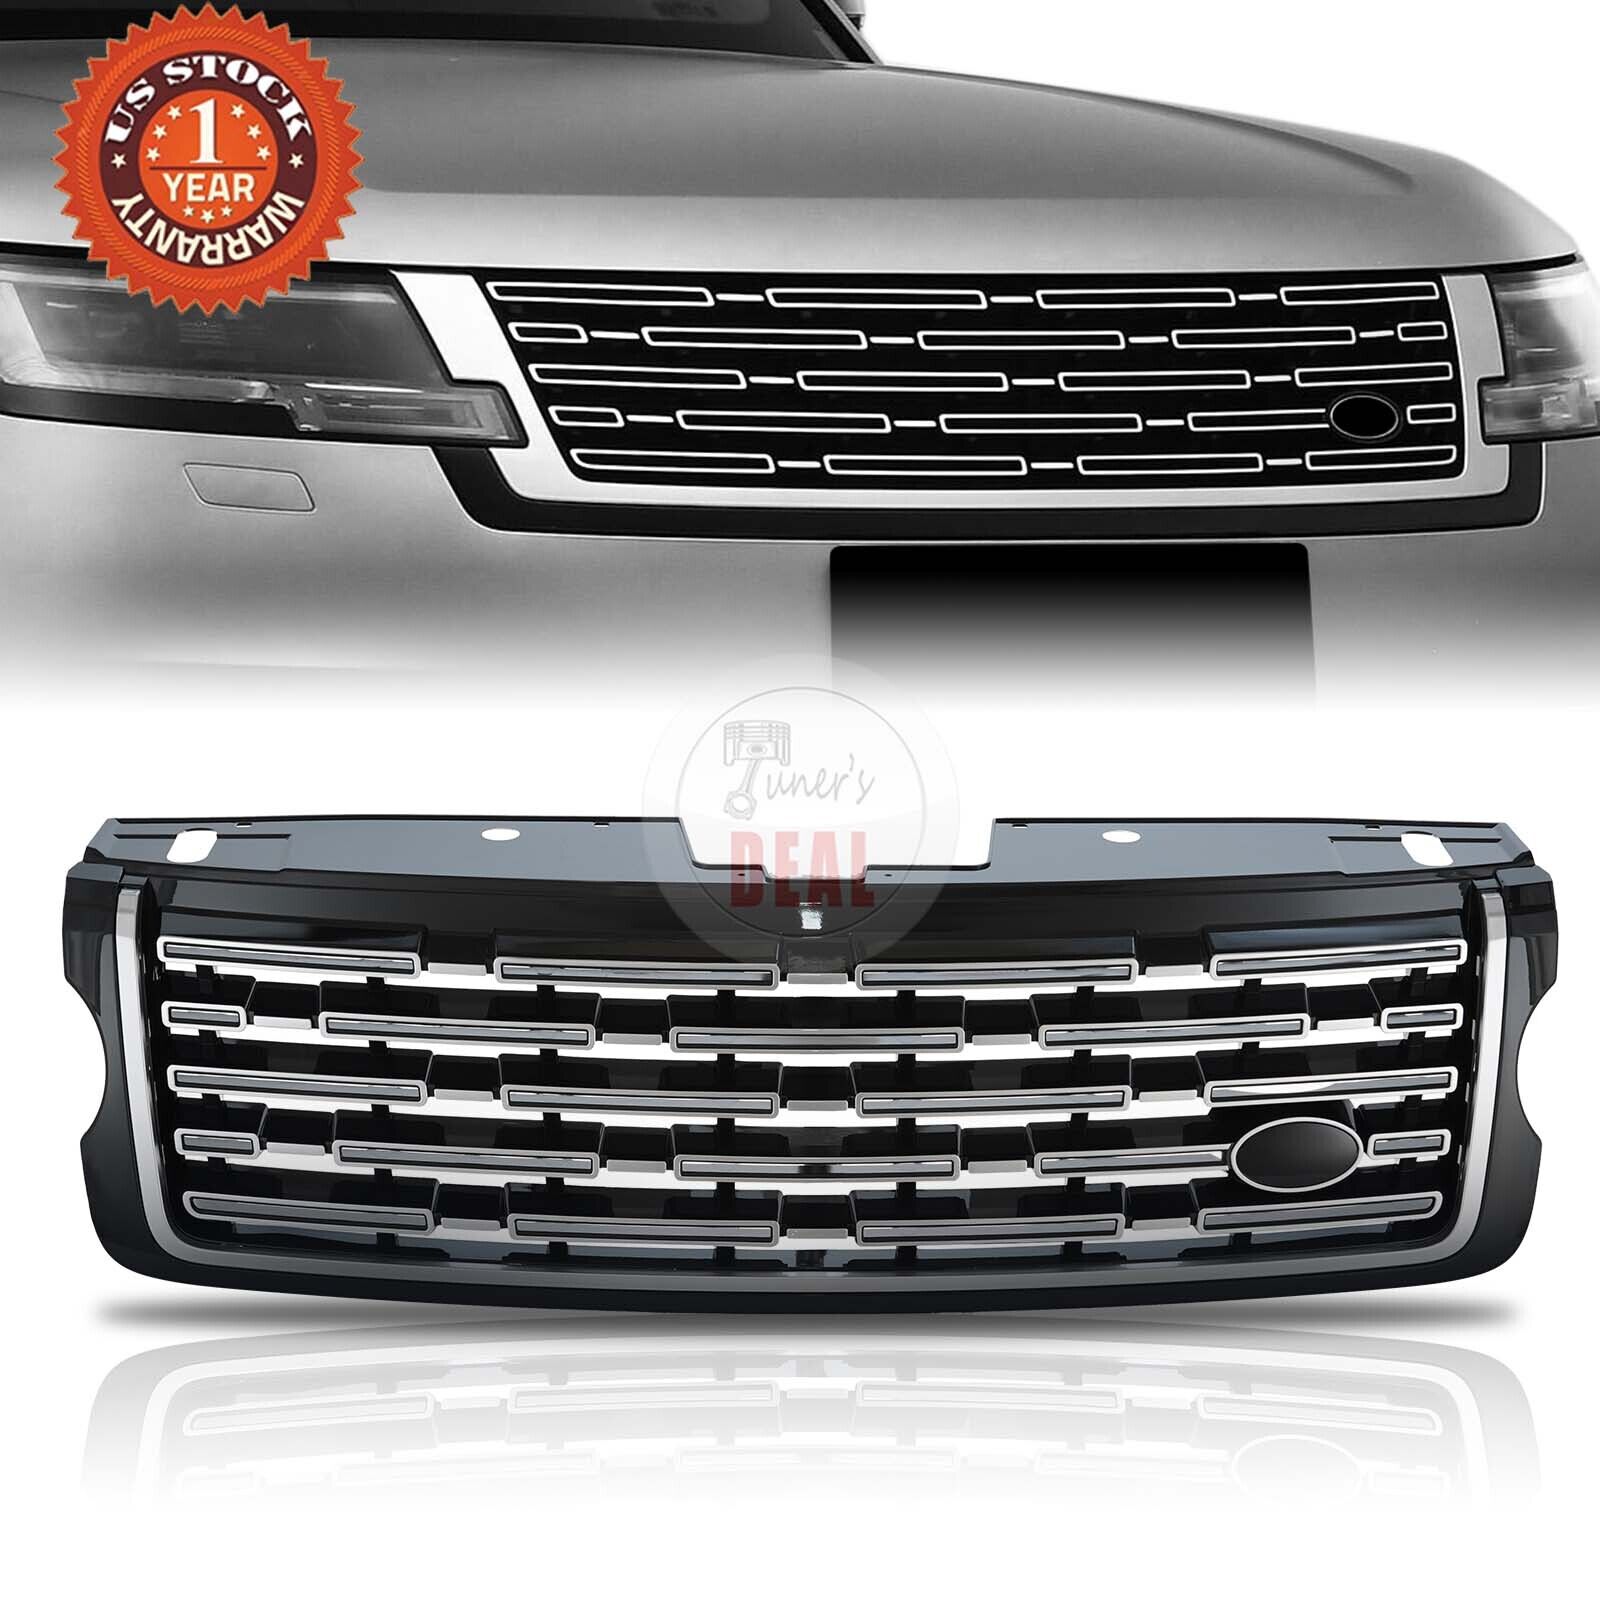 Gloss Black Chrome Front Grille For Land Rover Range Rover Vogue L405 2013-2017